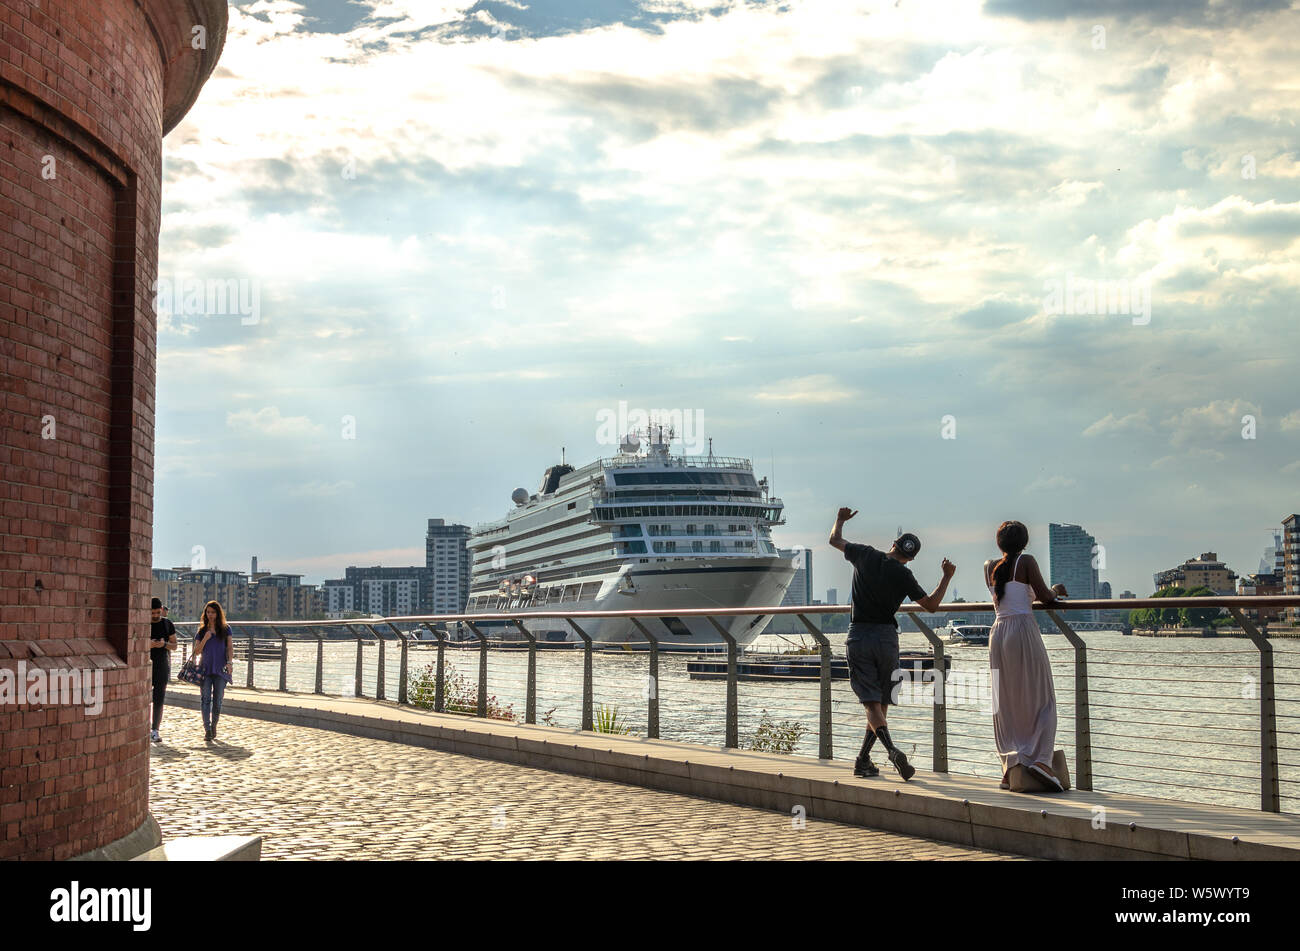 Tourists by the River Thames with MV Viking Sky cruise ship in the background at Greenwich, London Stock Photo